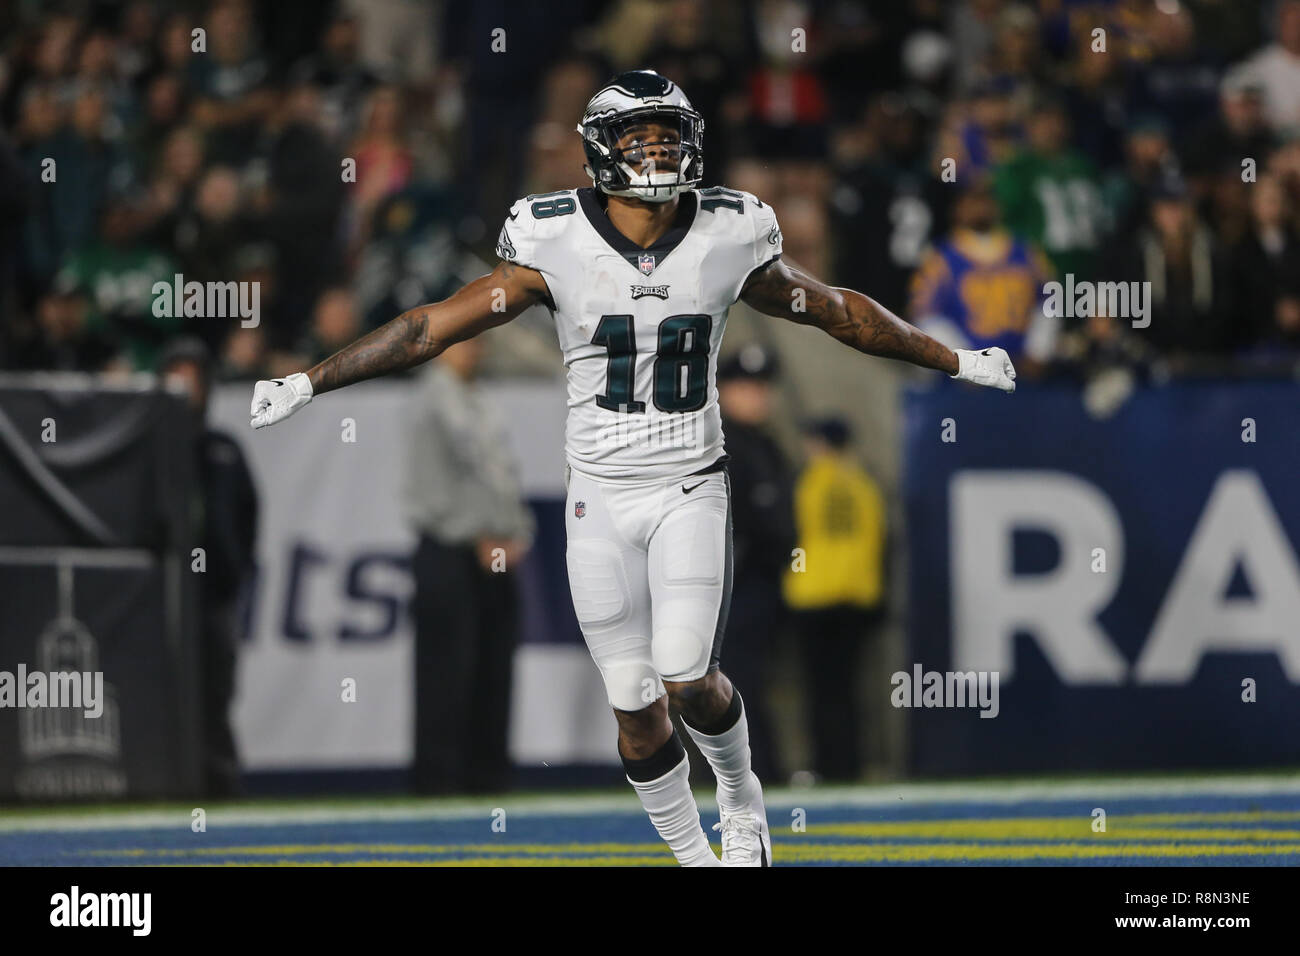 Los Angeles, CA, USA. 16th Dec, 2018. Philadelphia Eagles wide receiver Shelton Gibson #18 during the NFL Philadelphia Eagles vs Los Angeles Rams at the Los Angeles Memorial Coliseum in Los Angeles, Ca on December 16 2018. Jevone Moore Credit: csm/Alamy Live News Stock Photo